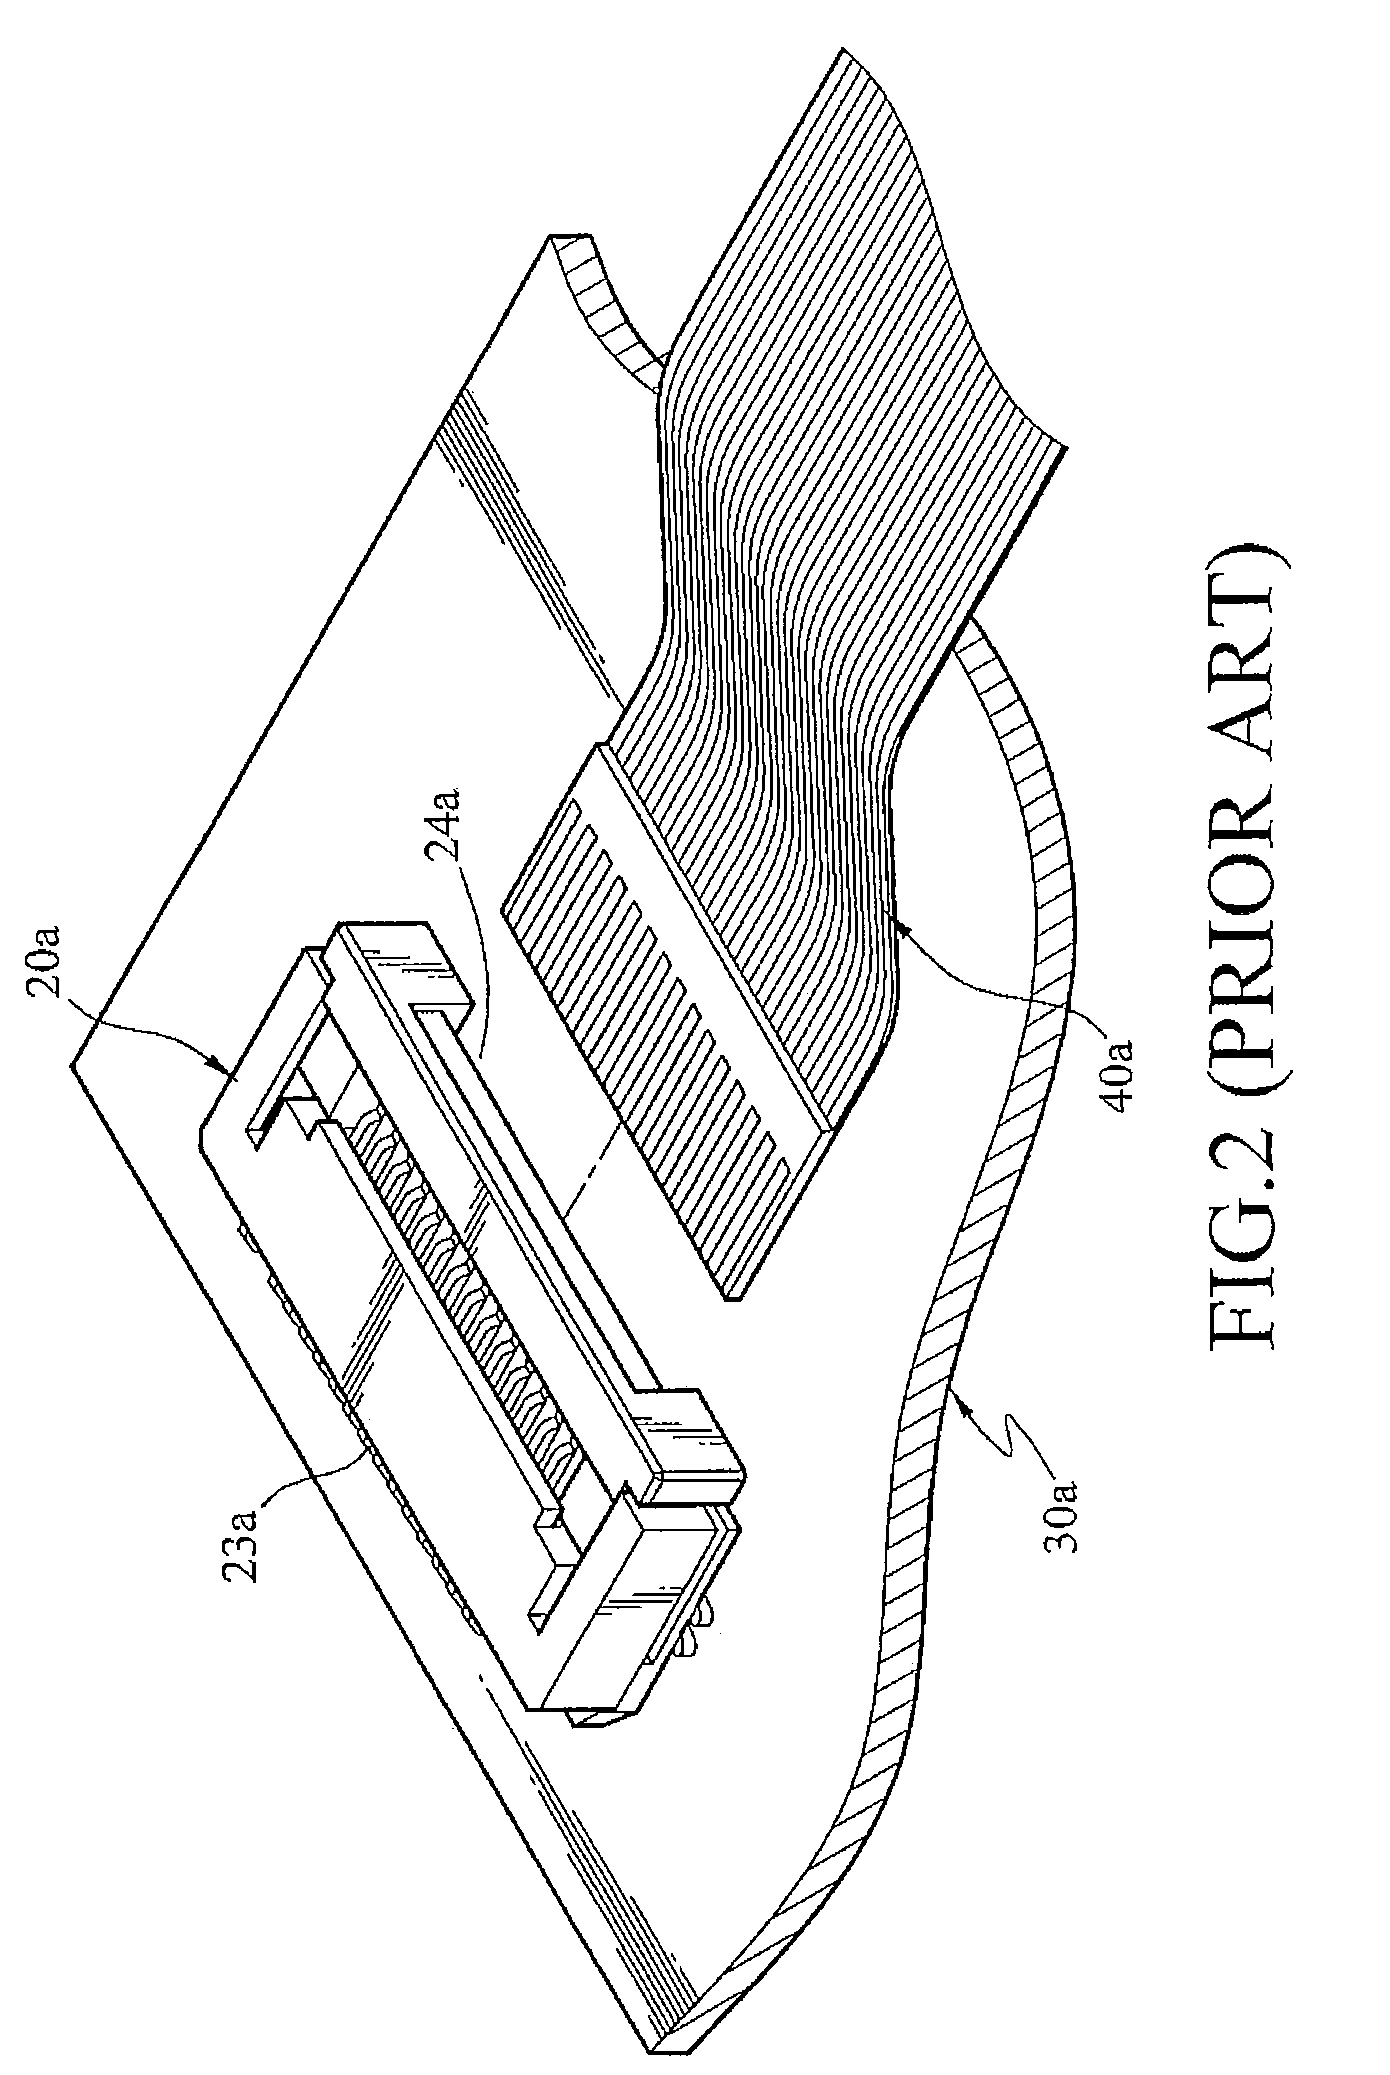 Connector for electronically connecting a cable and a printed circuit board